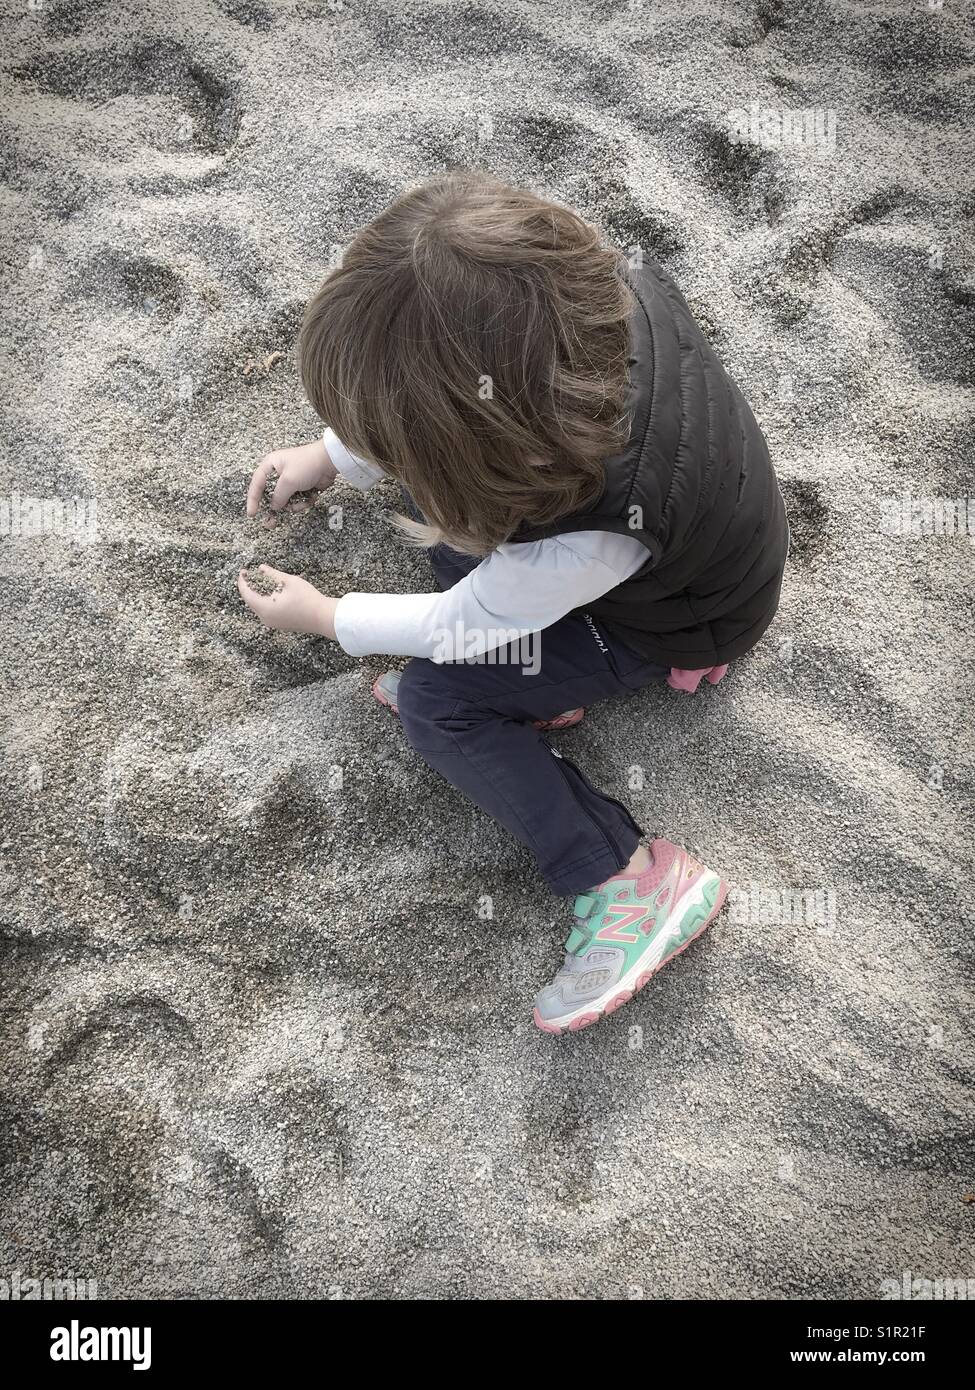 Young girl playing alone in a sandpit. Stock Photo